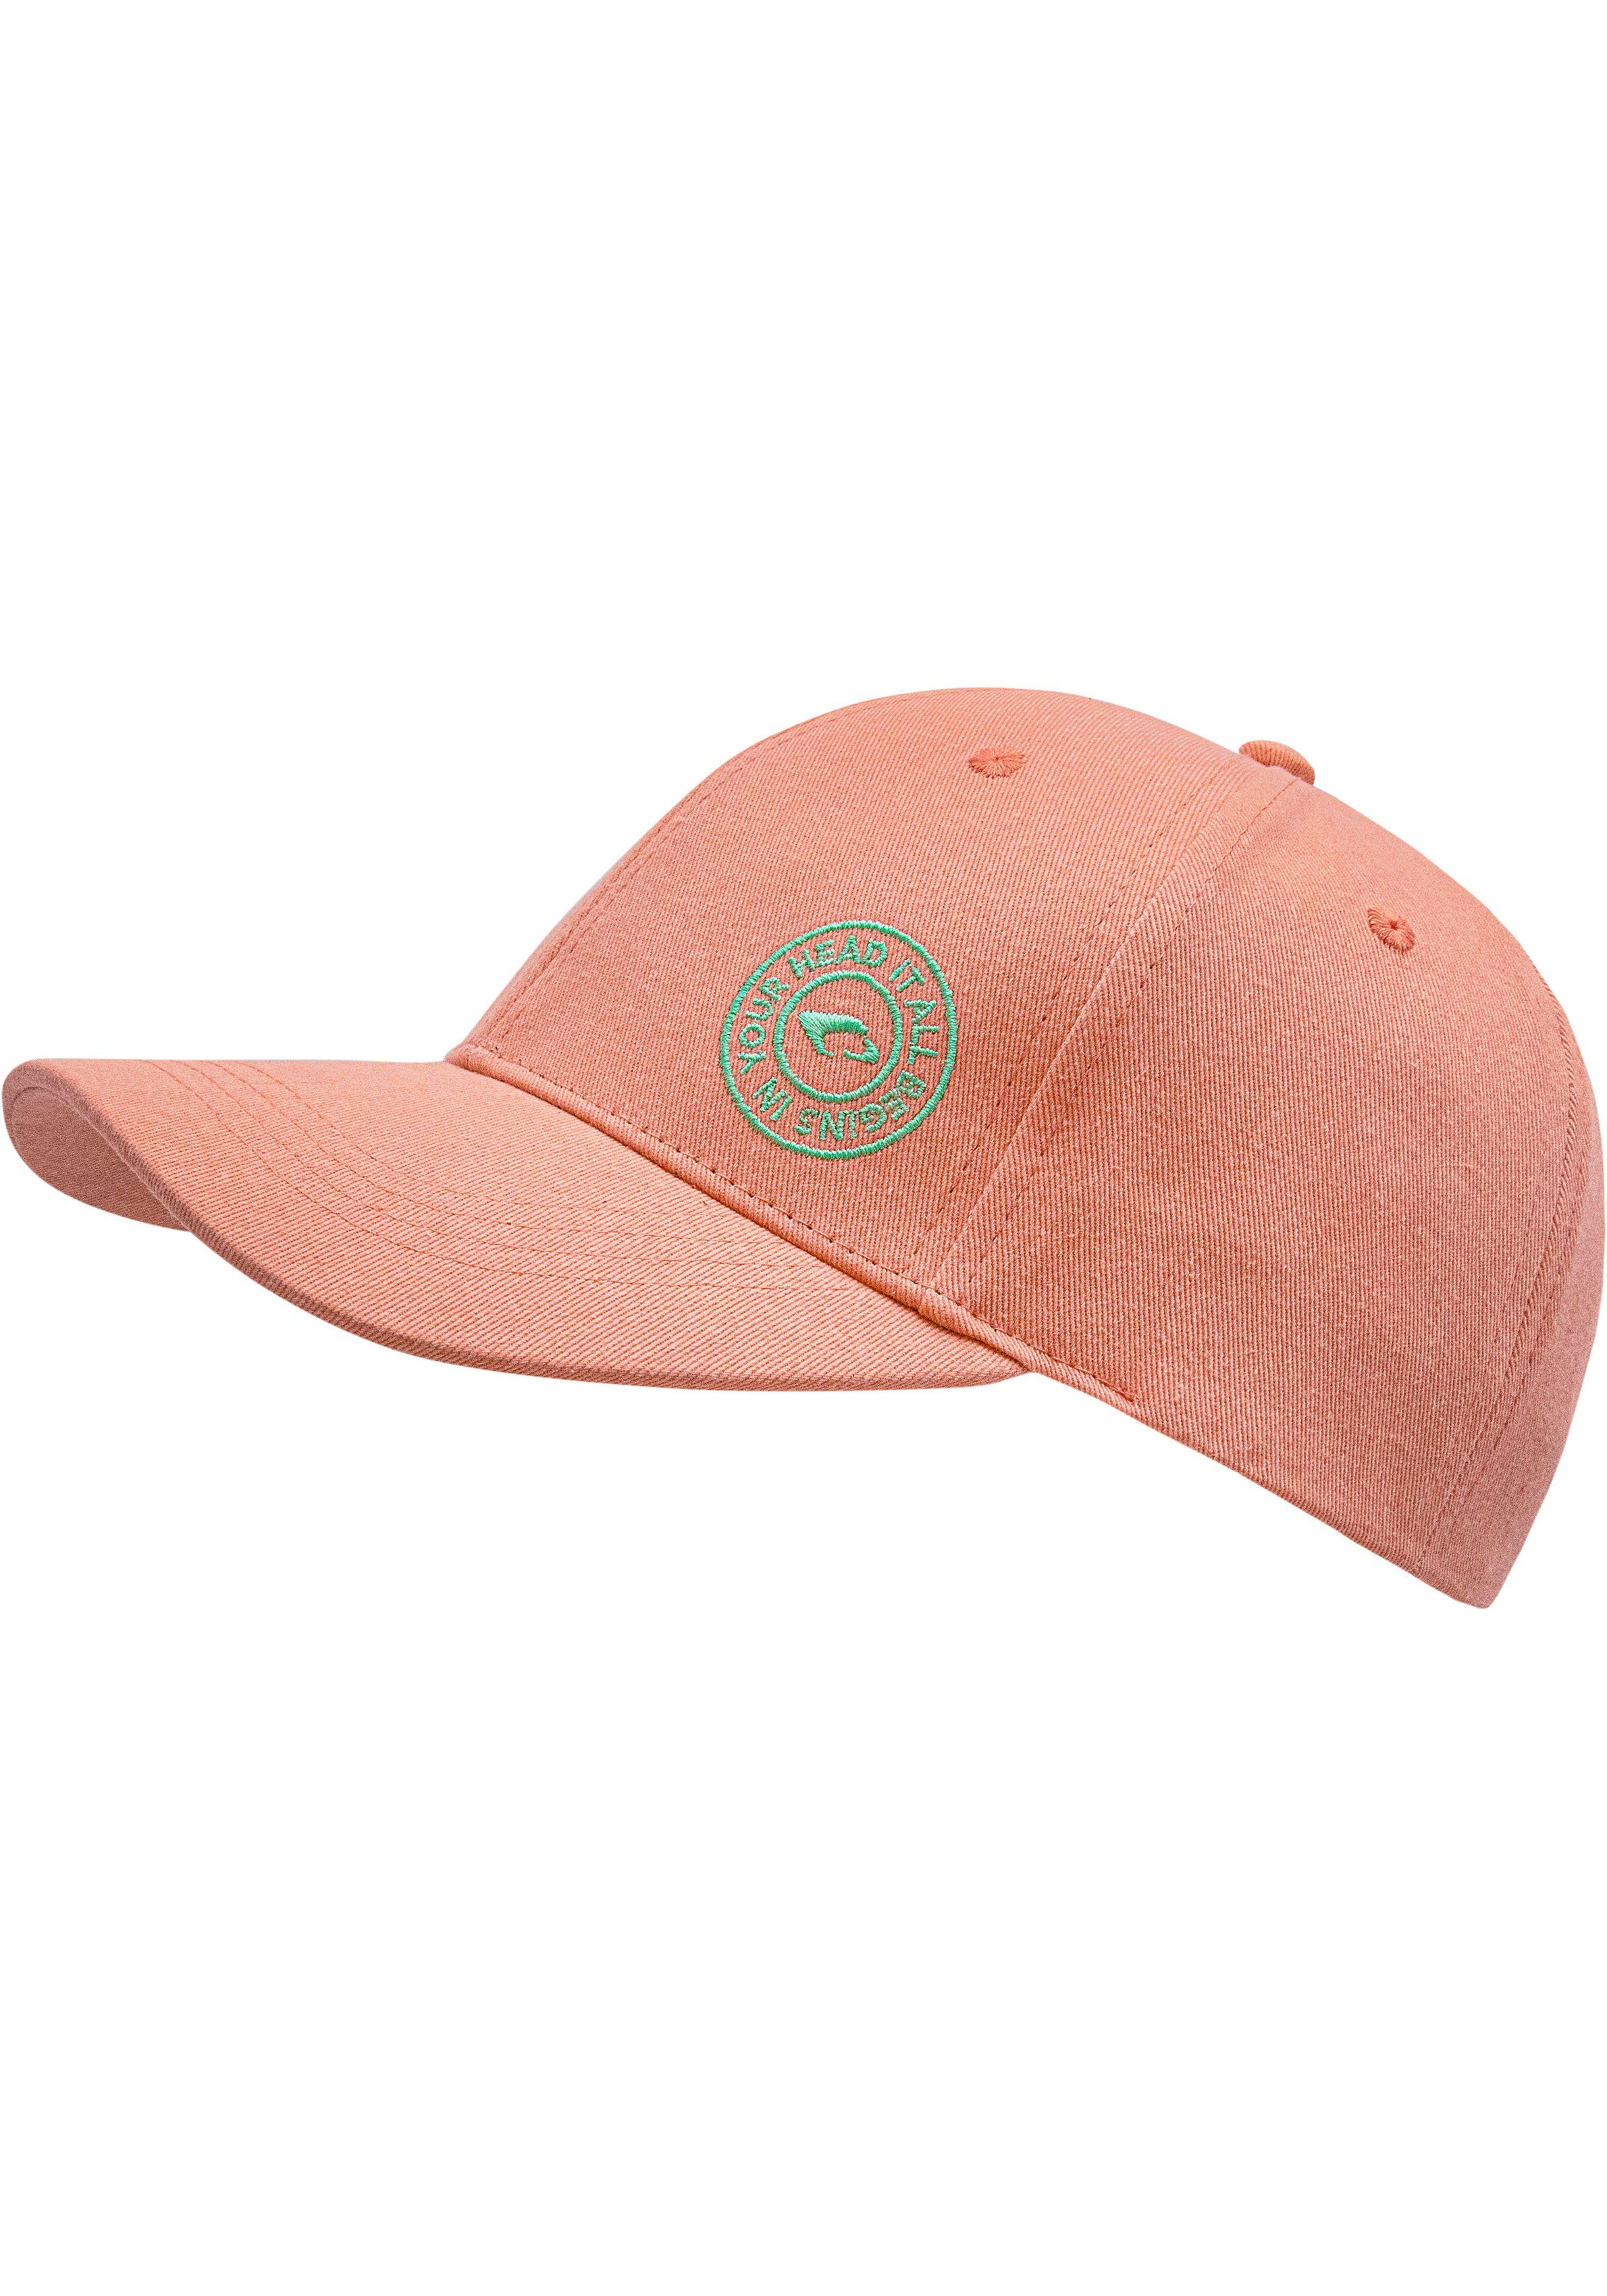 chillouts Cap Baseball Hat Arklow coral